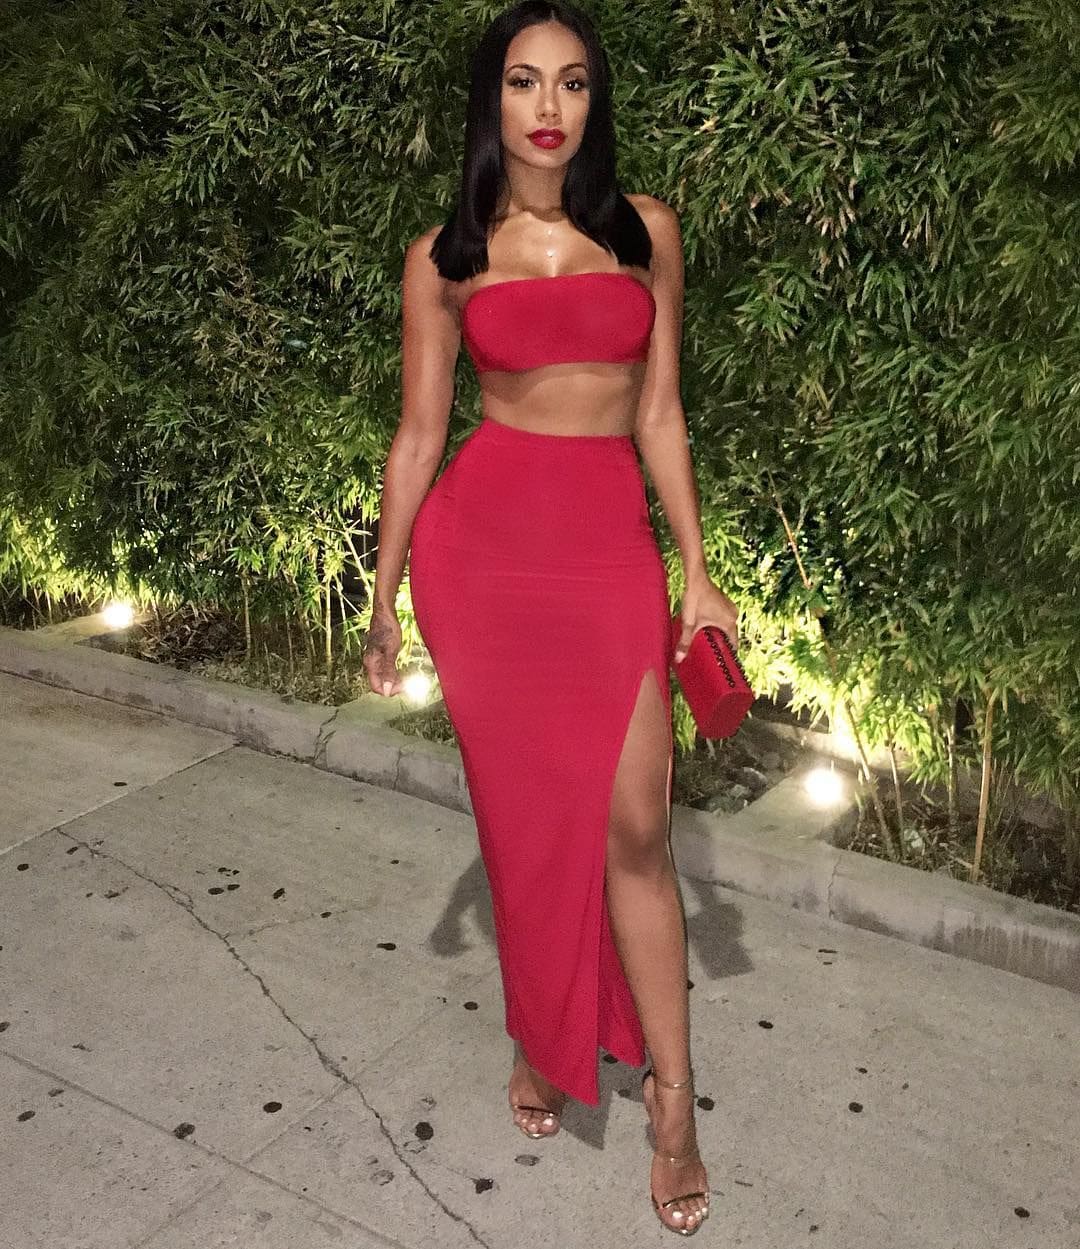 Erica Mena Shares A Jaw-Dropping Look On Her Social Media Account For Christmas